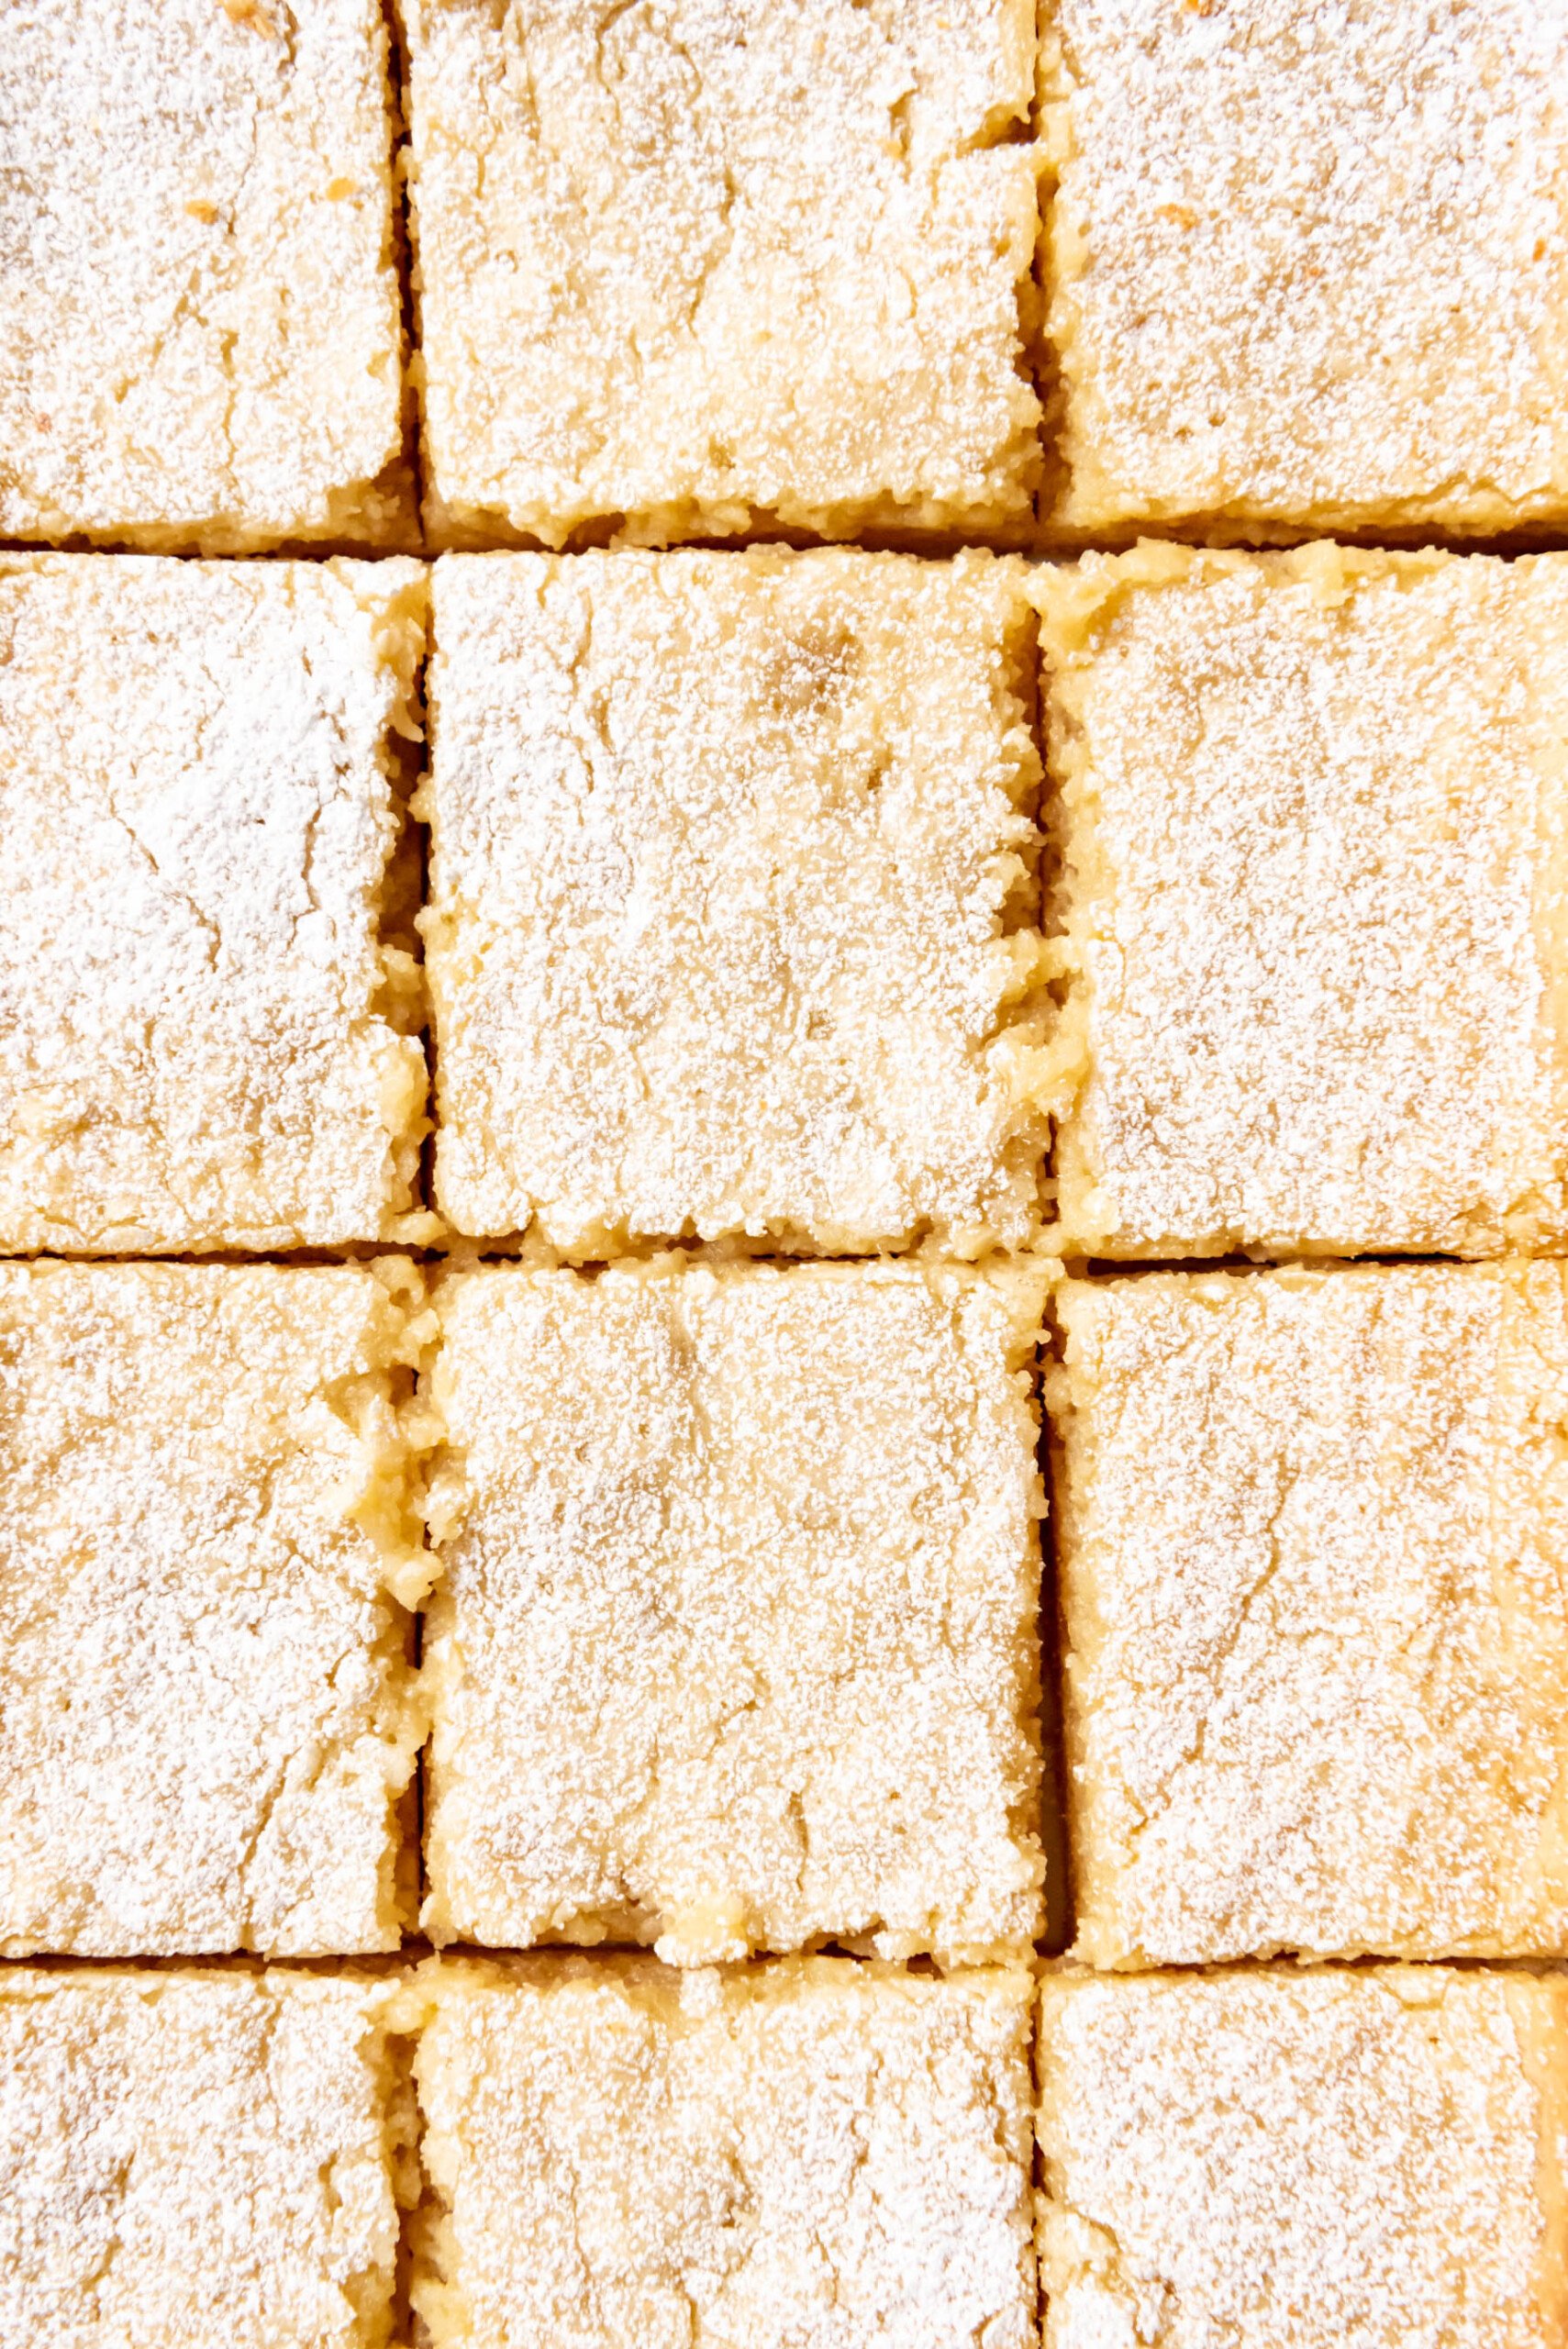 A close images of squares of gooey butter cake with powdered sugar dusted on top.